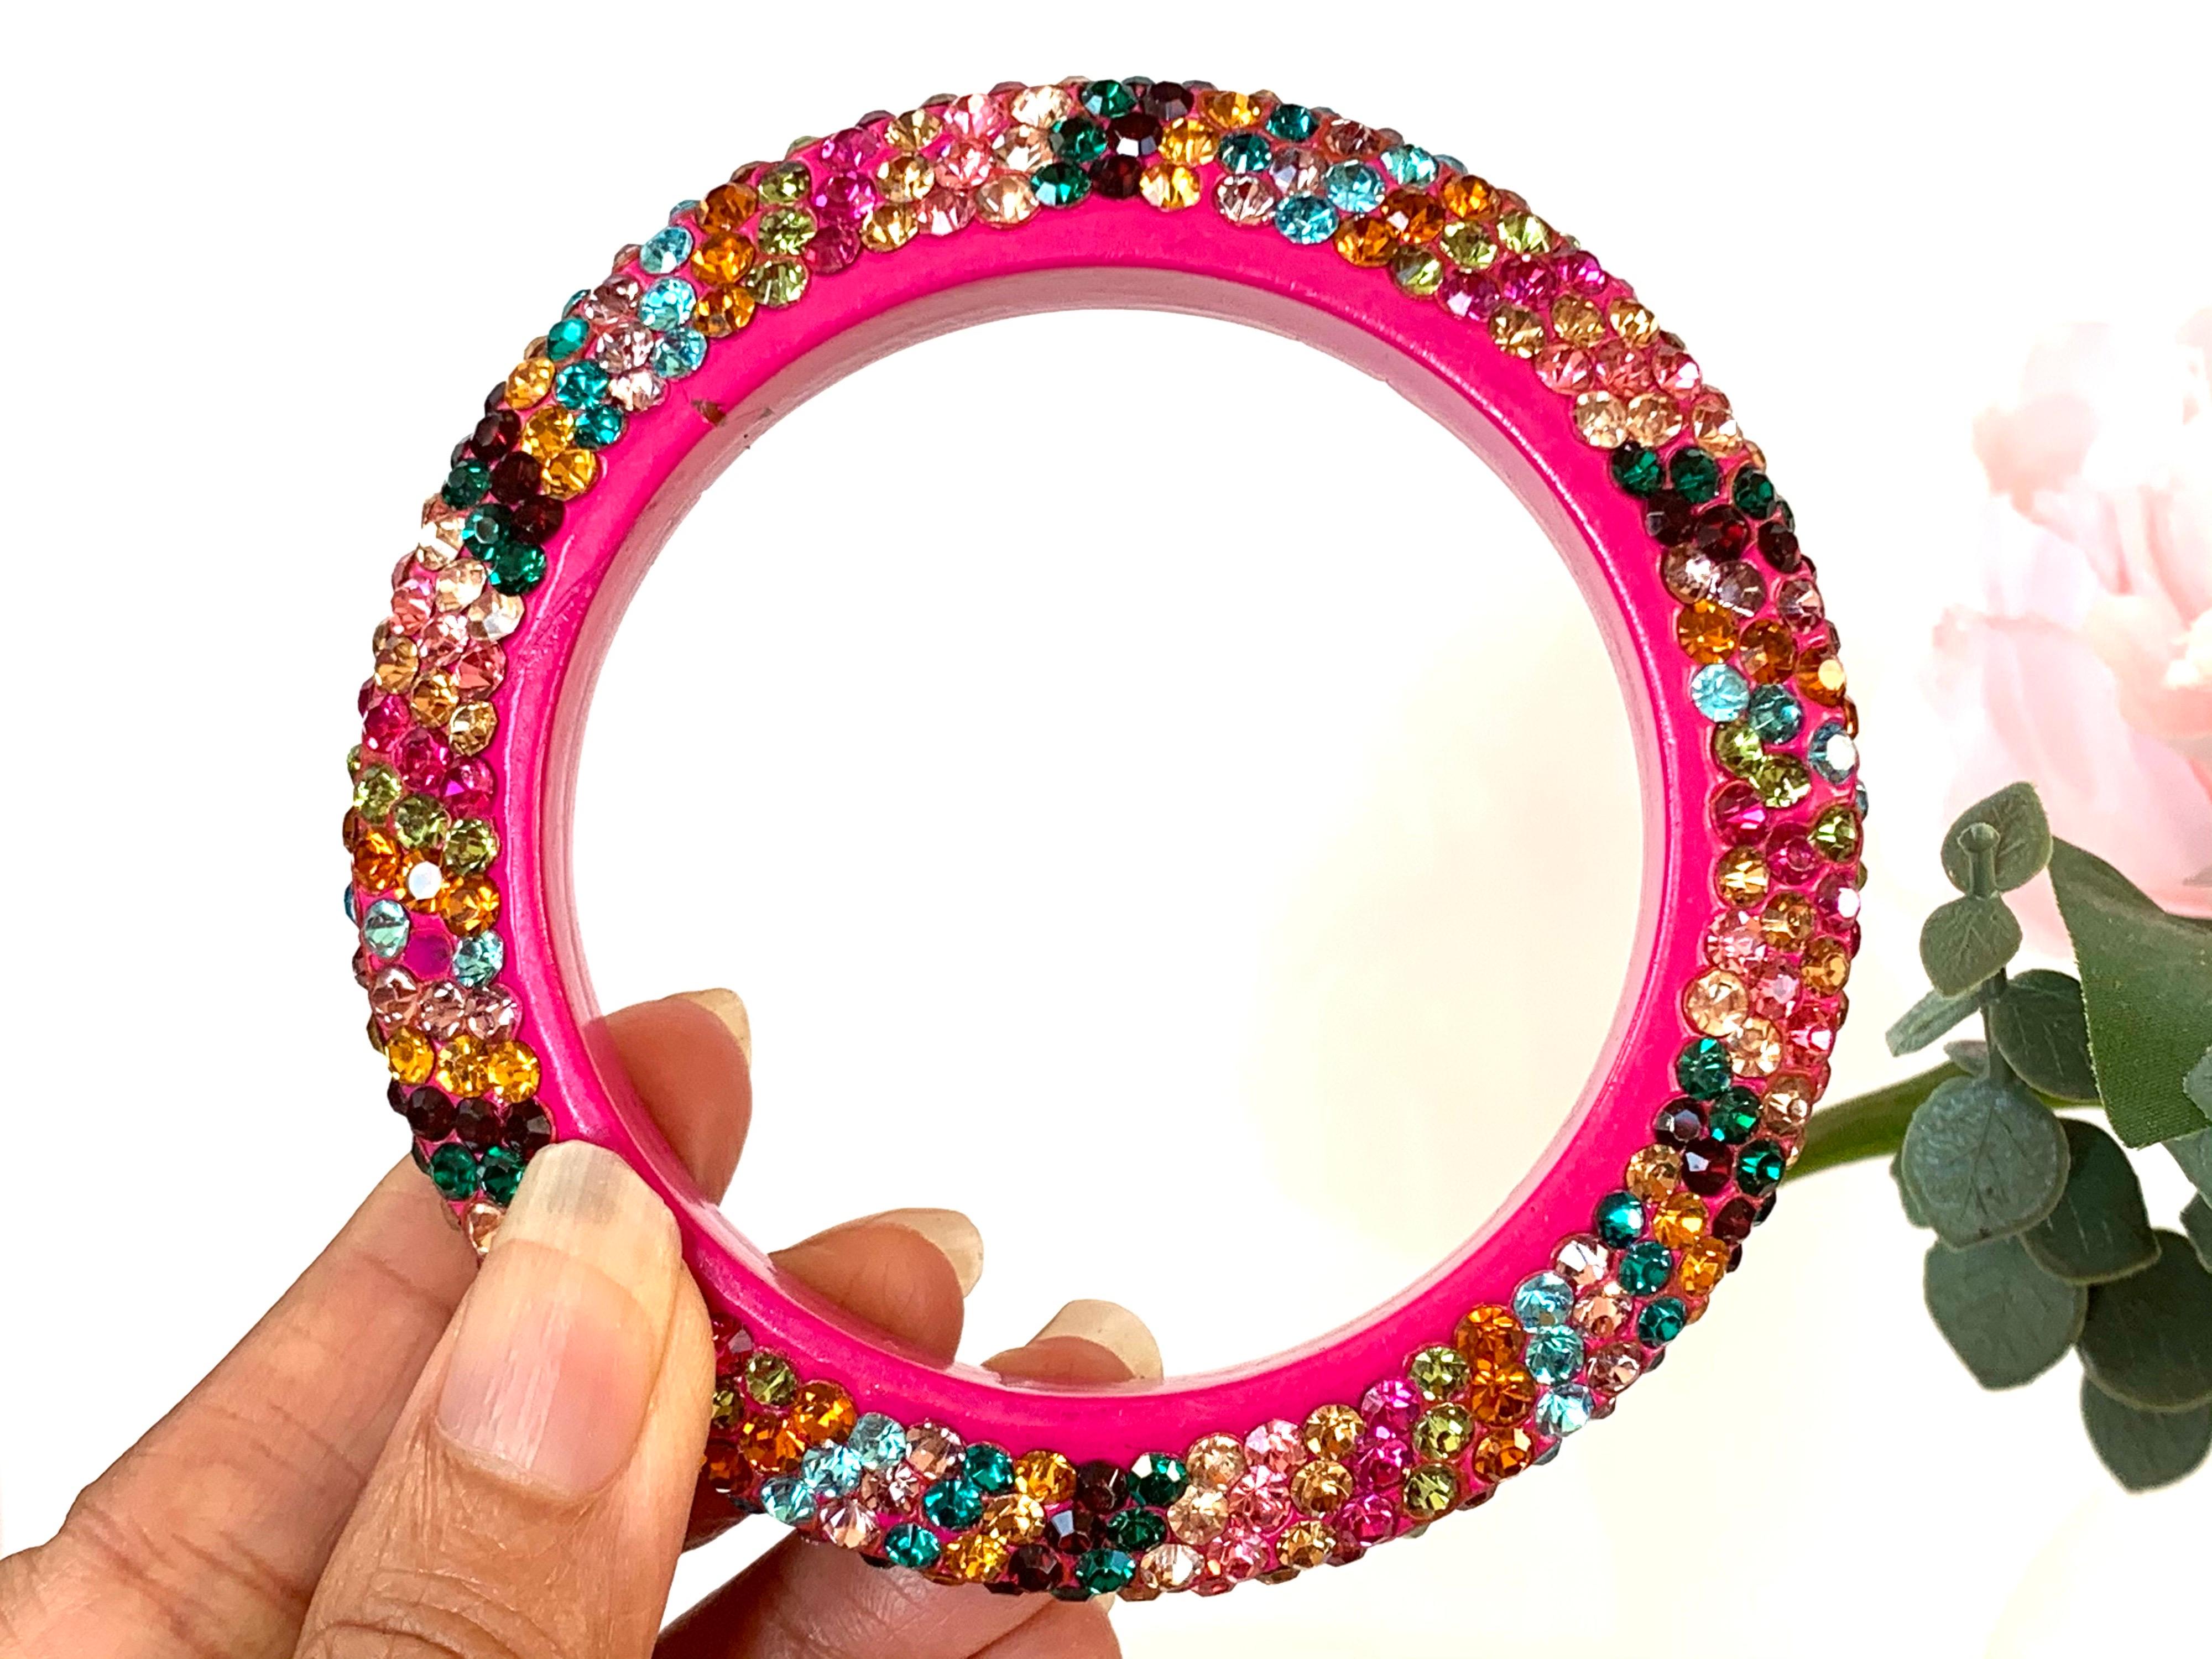 Handmade slip on bangle embellished with multi color sparkling rhinestones. Inner diameter 65.00 mm (2.56 in), inner circumference 204.2 mm (8.04 in). 

FOLLOW MEGHNA JEWELS storefront to view the latest collection & exclusive pieces. Meghna Jewels